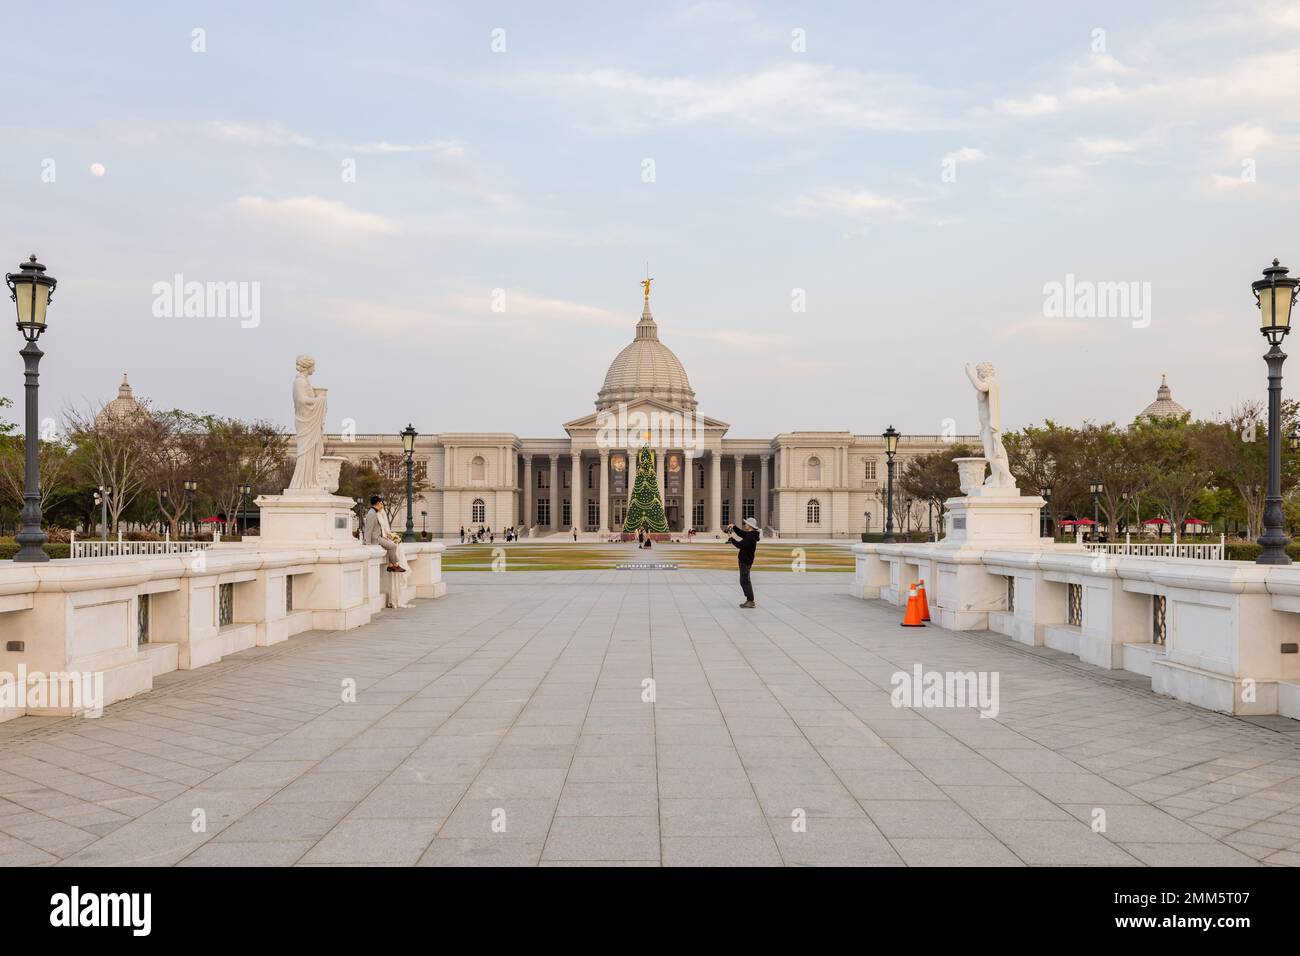 Tainan, JAN 5 2023 - Sunny exterior view of the famous Chimei Museum Stock Photo